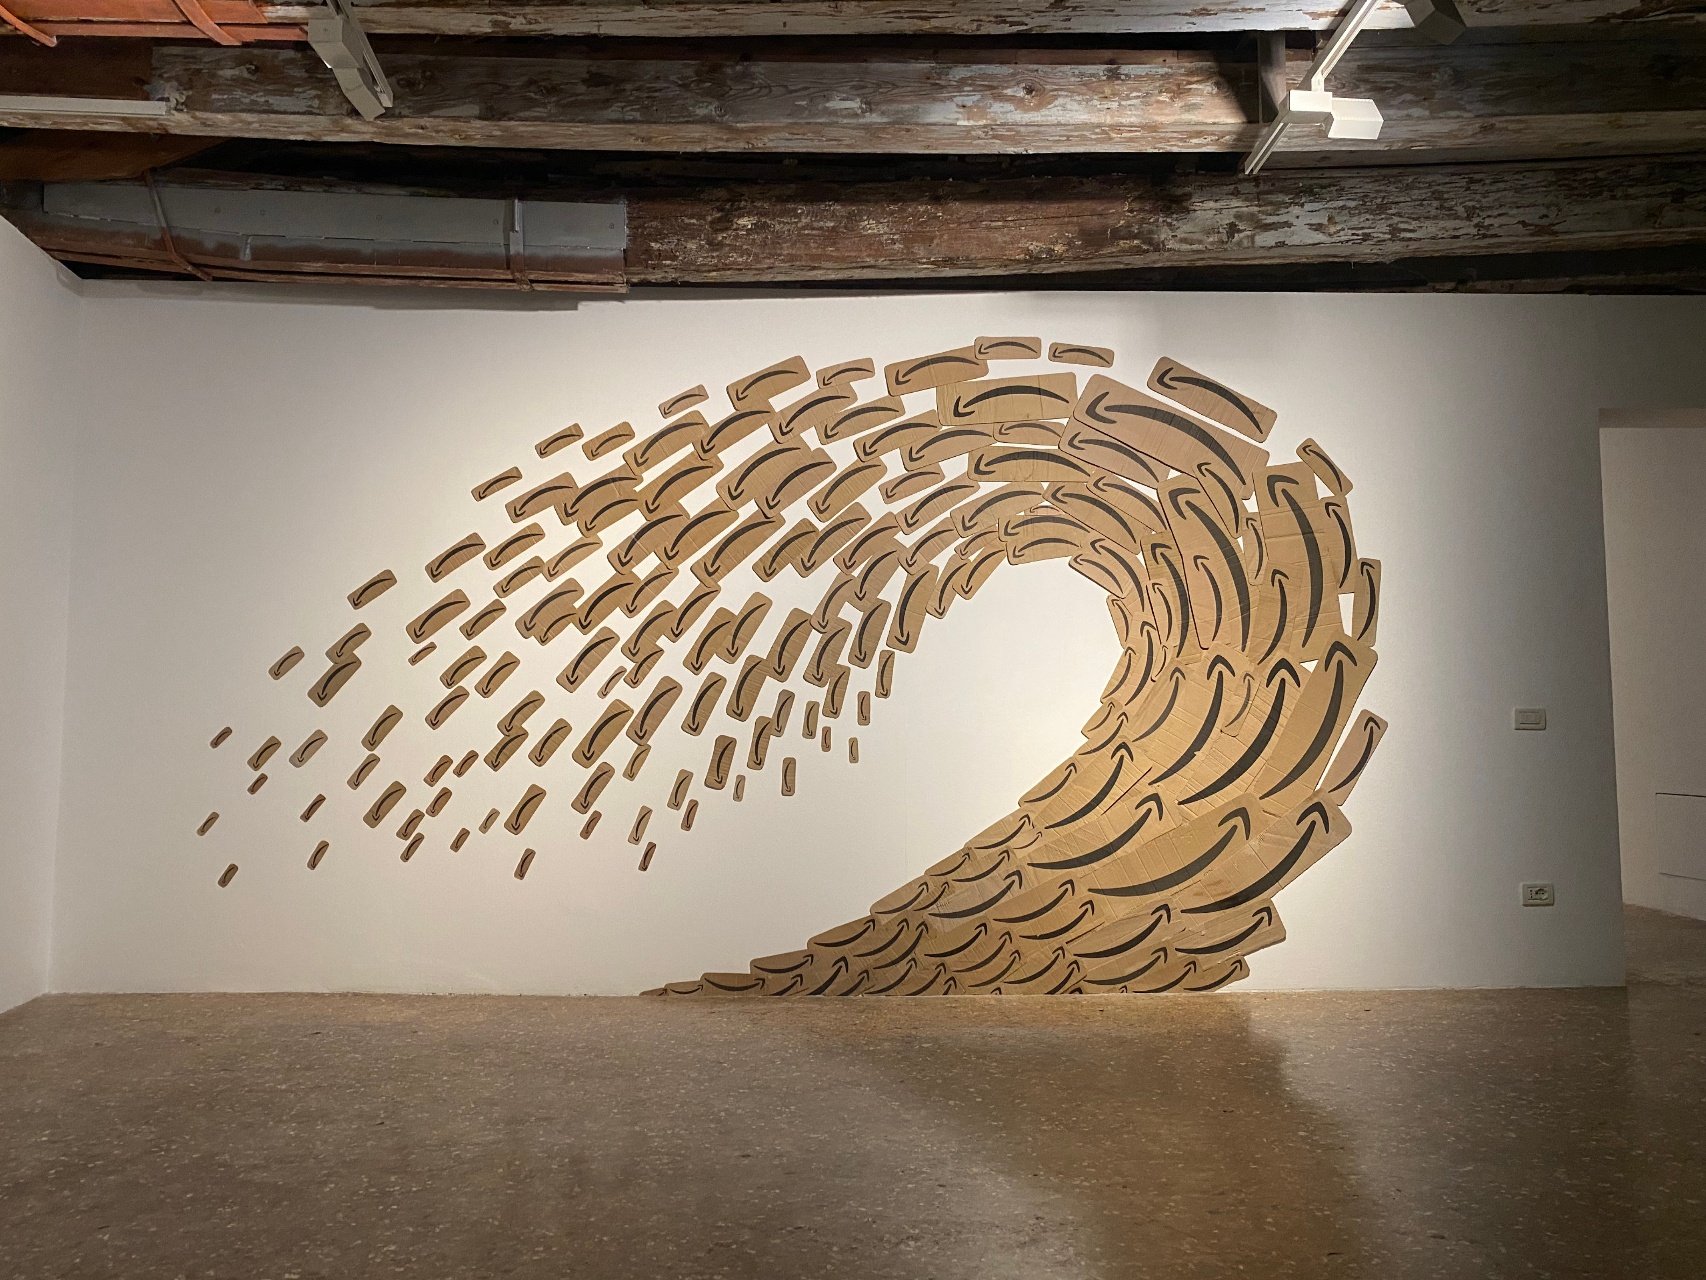 Tina Zimmermann / Palazzo Mora, Amazon Tsunami, 2021, Site-specific wall installation made from hundreds of cardboard pieces ripped from Amazon shipping boxes